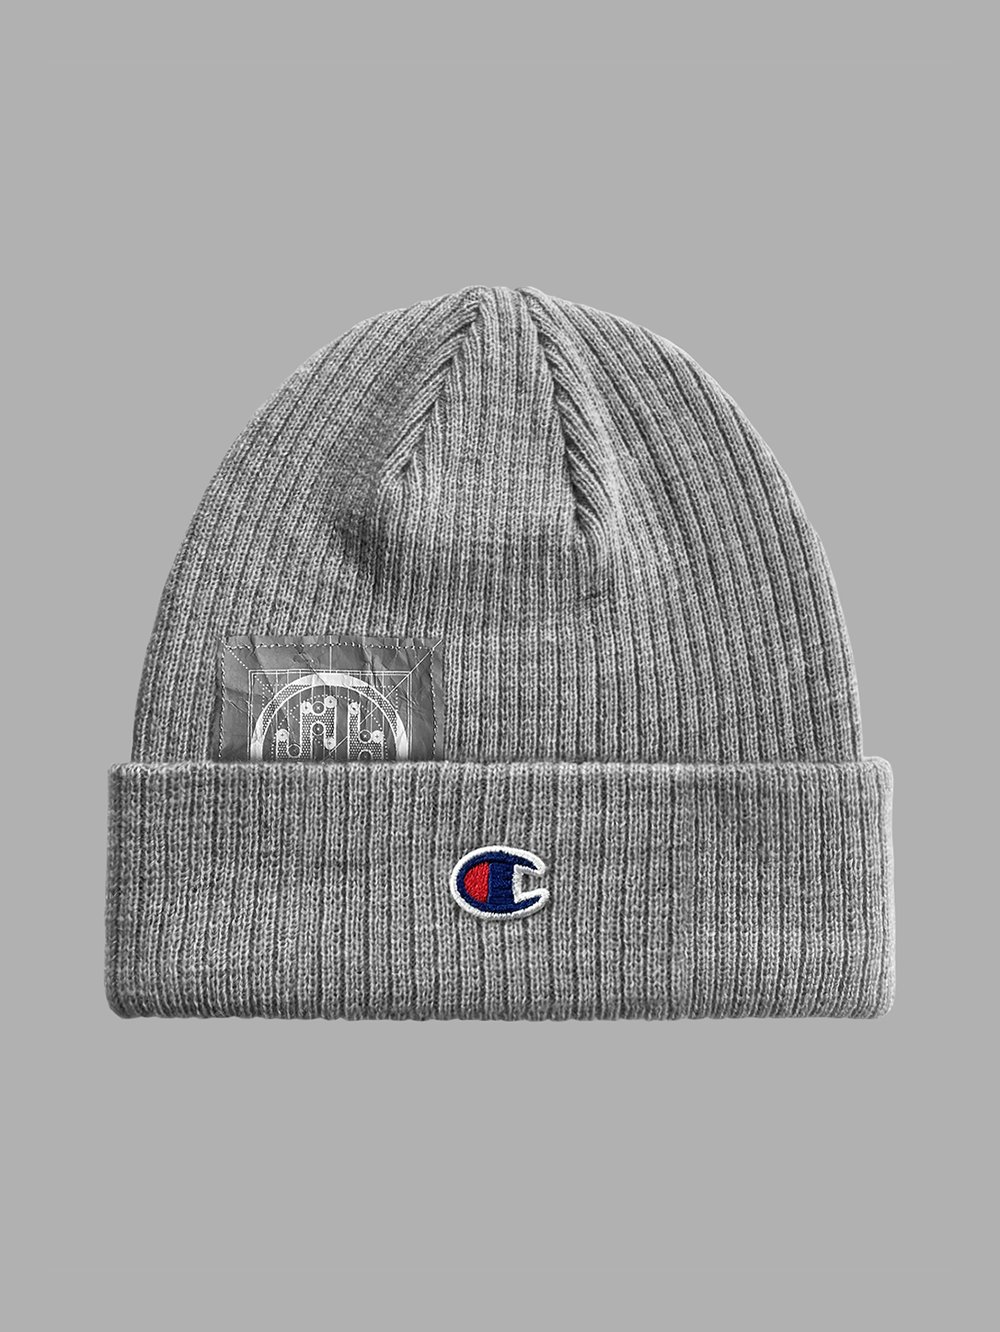 TERTIARY TUQUE